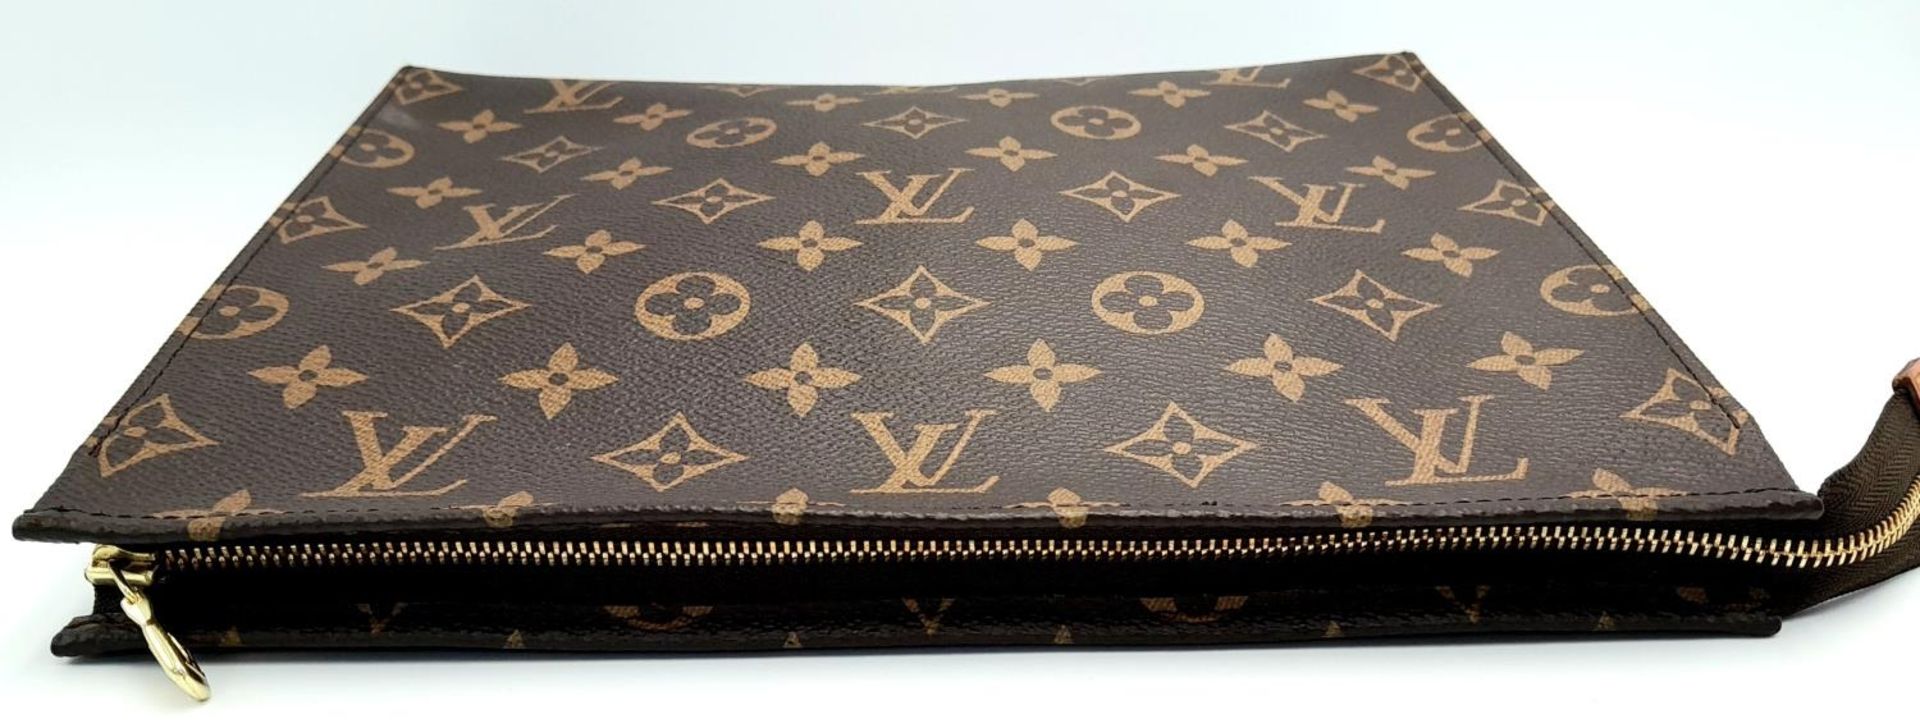 A Louis Vuitton Toiletries Pouch. Monogramed canvas exterior with gold-toned hardware and zipped top - Image 6 of 9